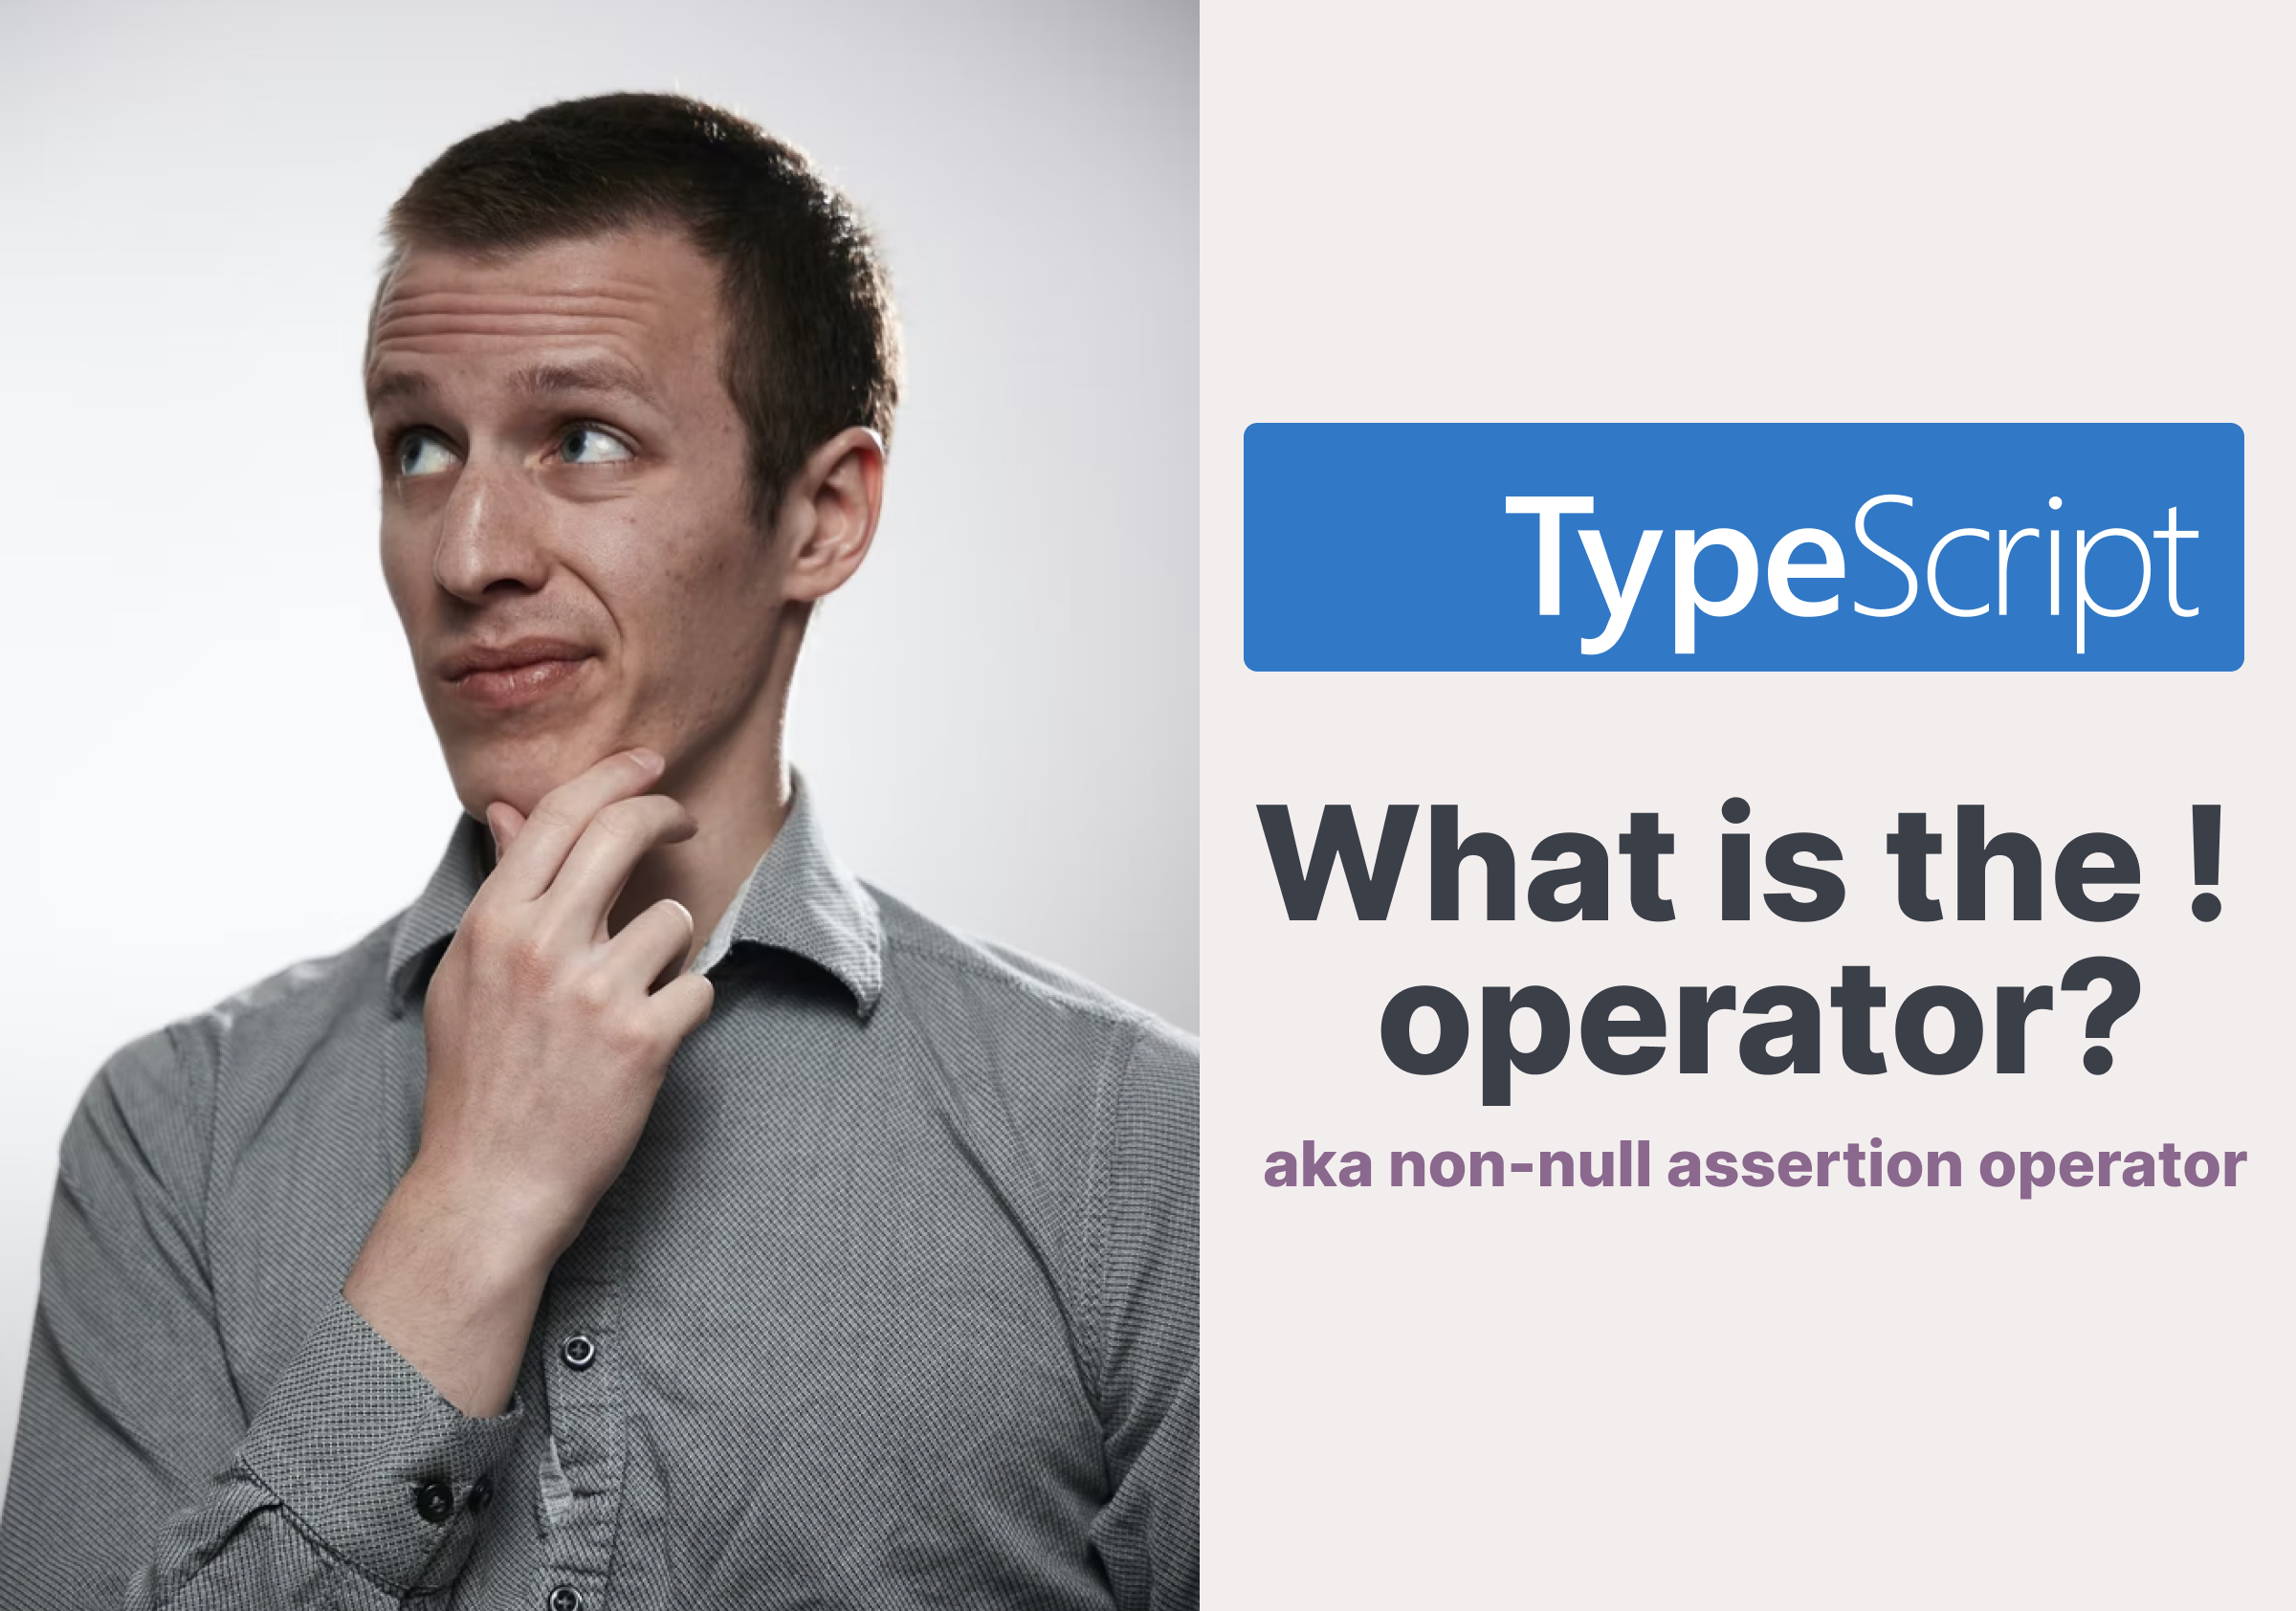 What is the bang operator in Typescript?